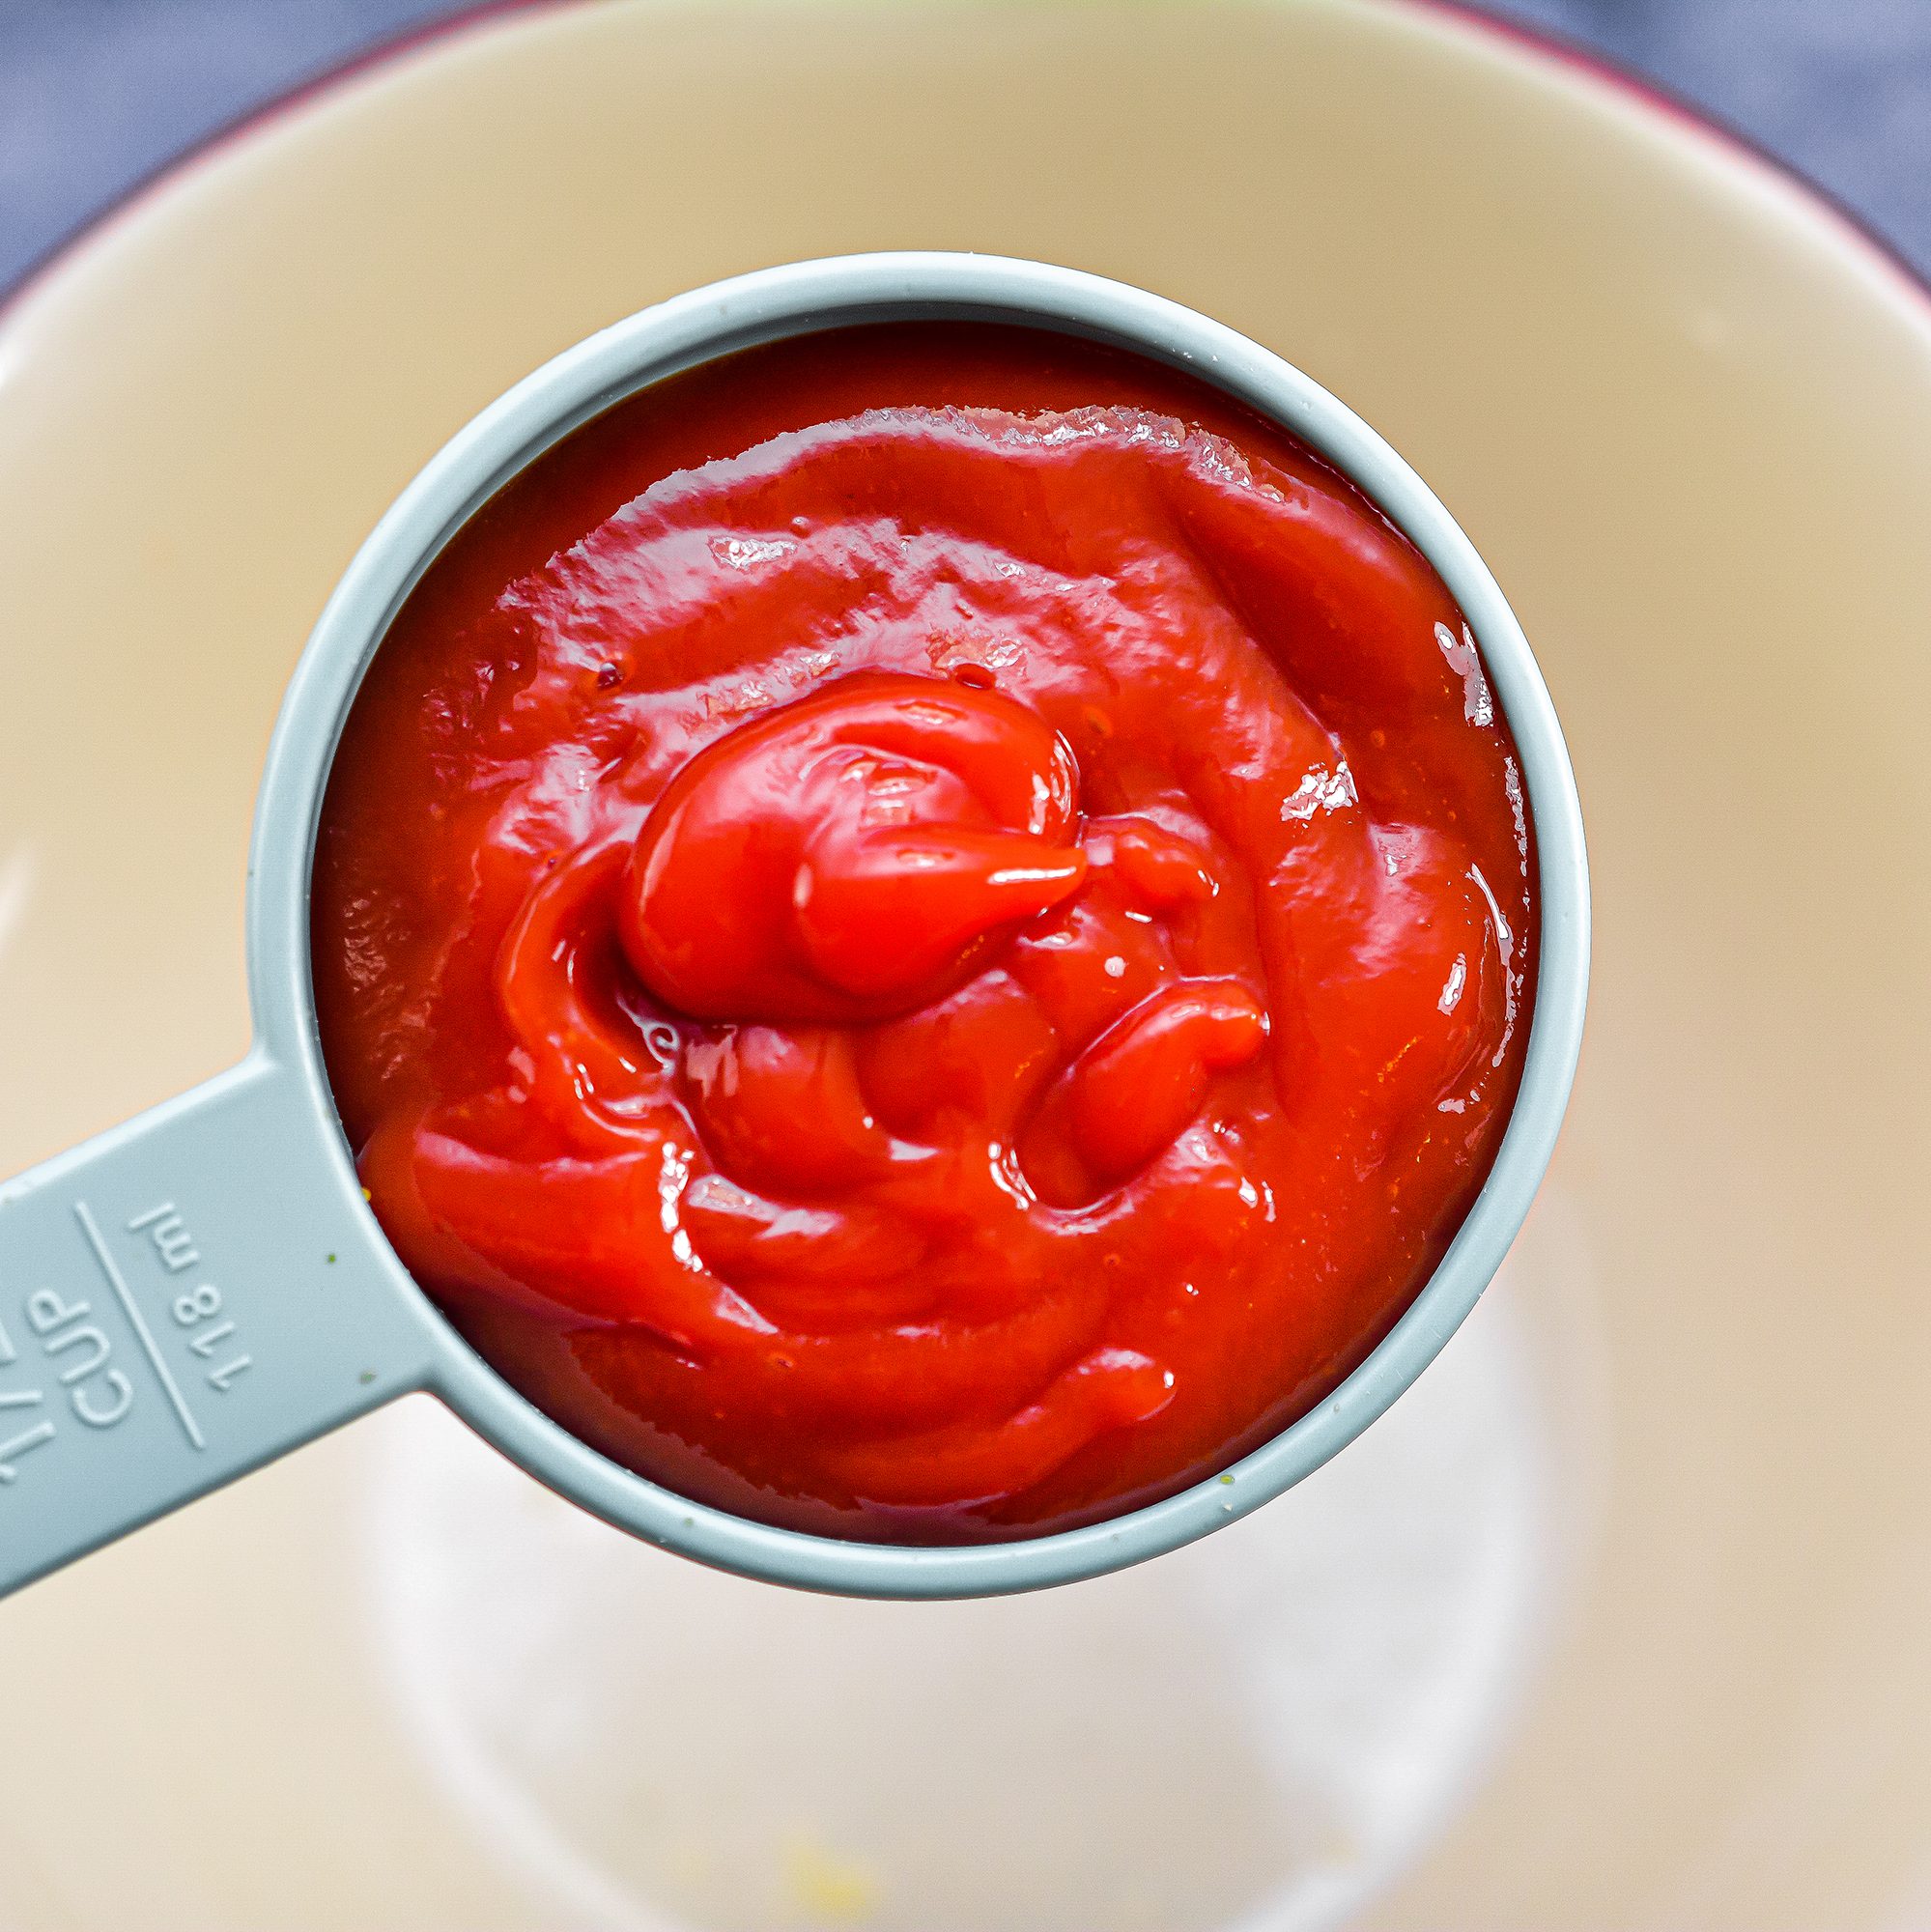 In a bowl, add ½ cup of Ketchup.